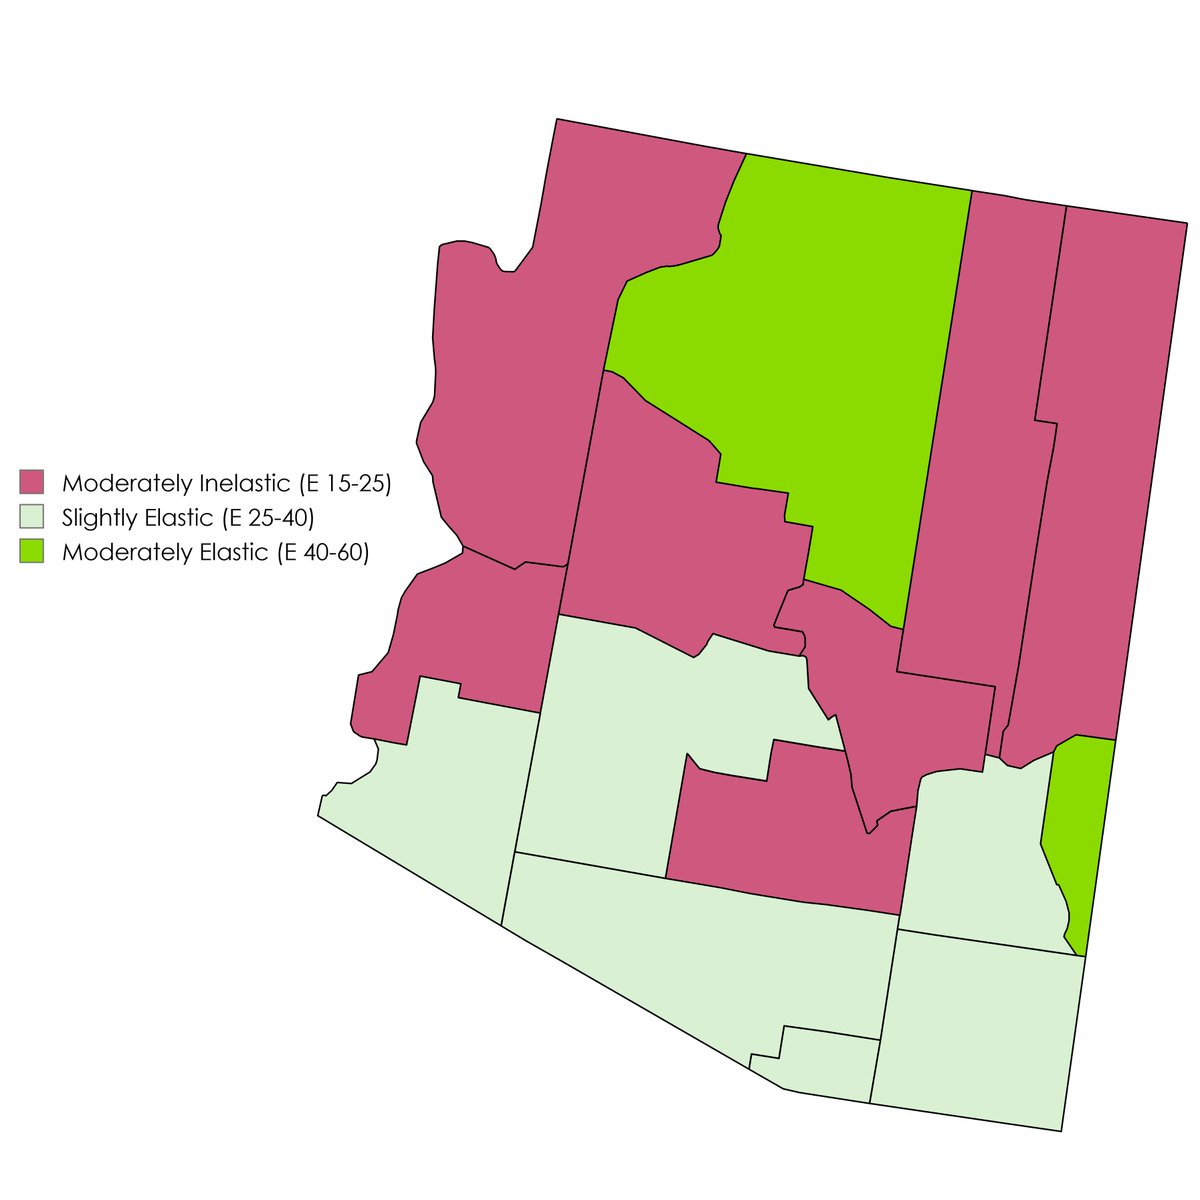 #ElectionTwitter Here's a map of the elasticity by county in Arizona from 2016-2022. Ticket splitting is scarce in most of AZ, with the 2 exceptions of Greenlee (miners that vote Dem downballot) and Coconino (trending blue due to college grads).